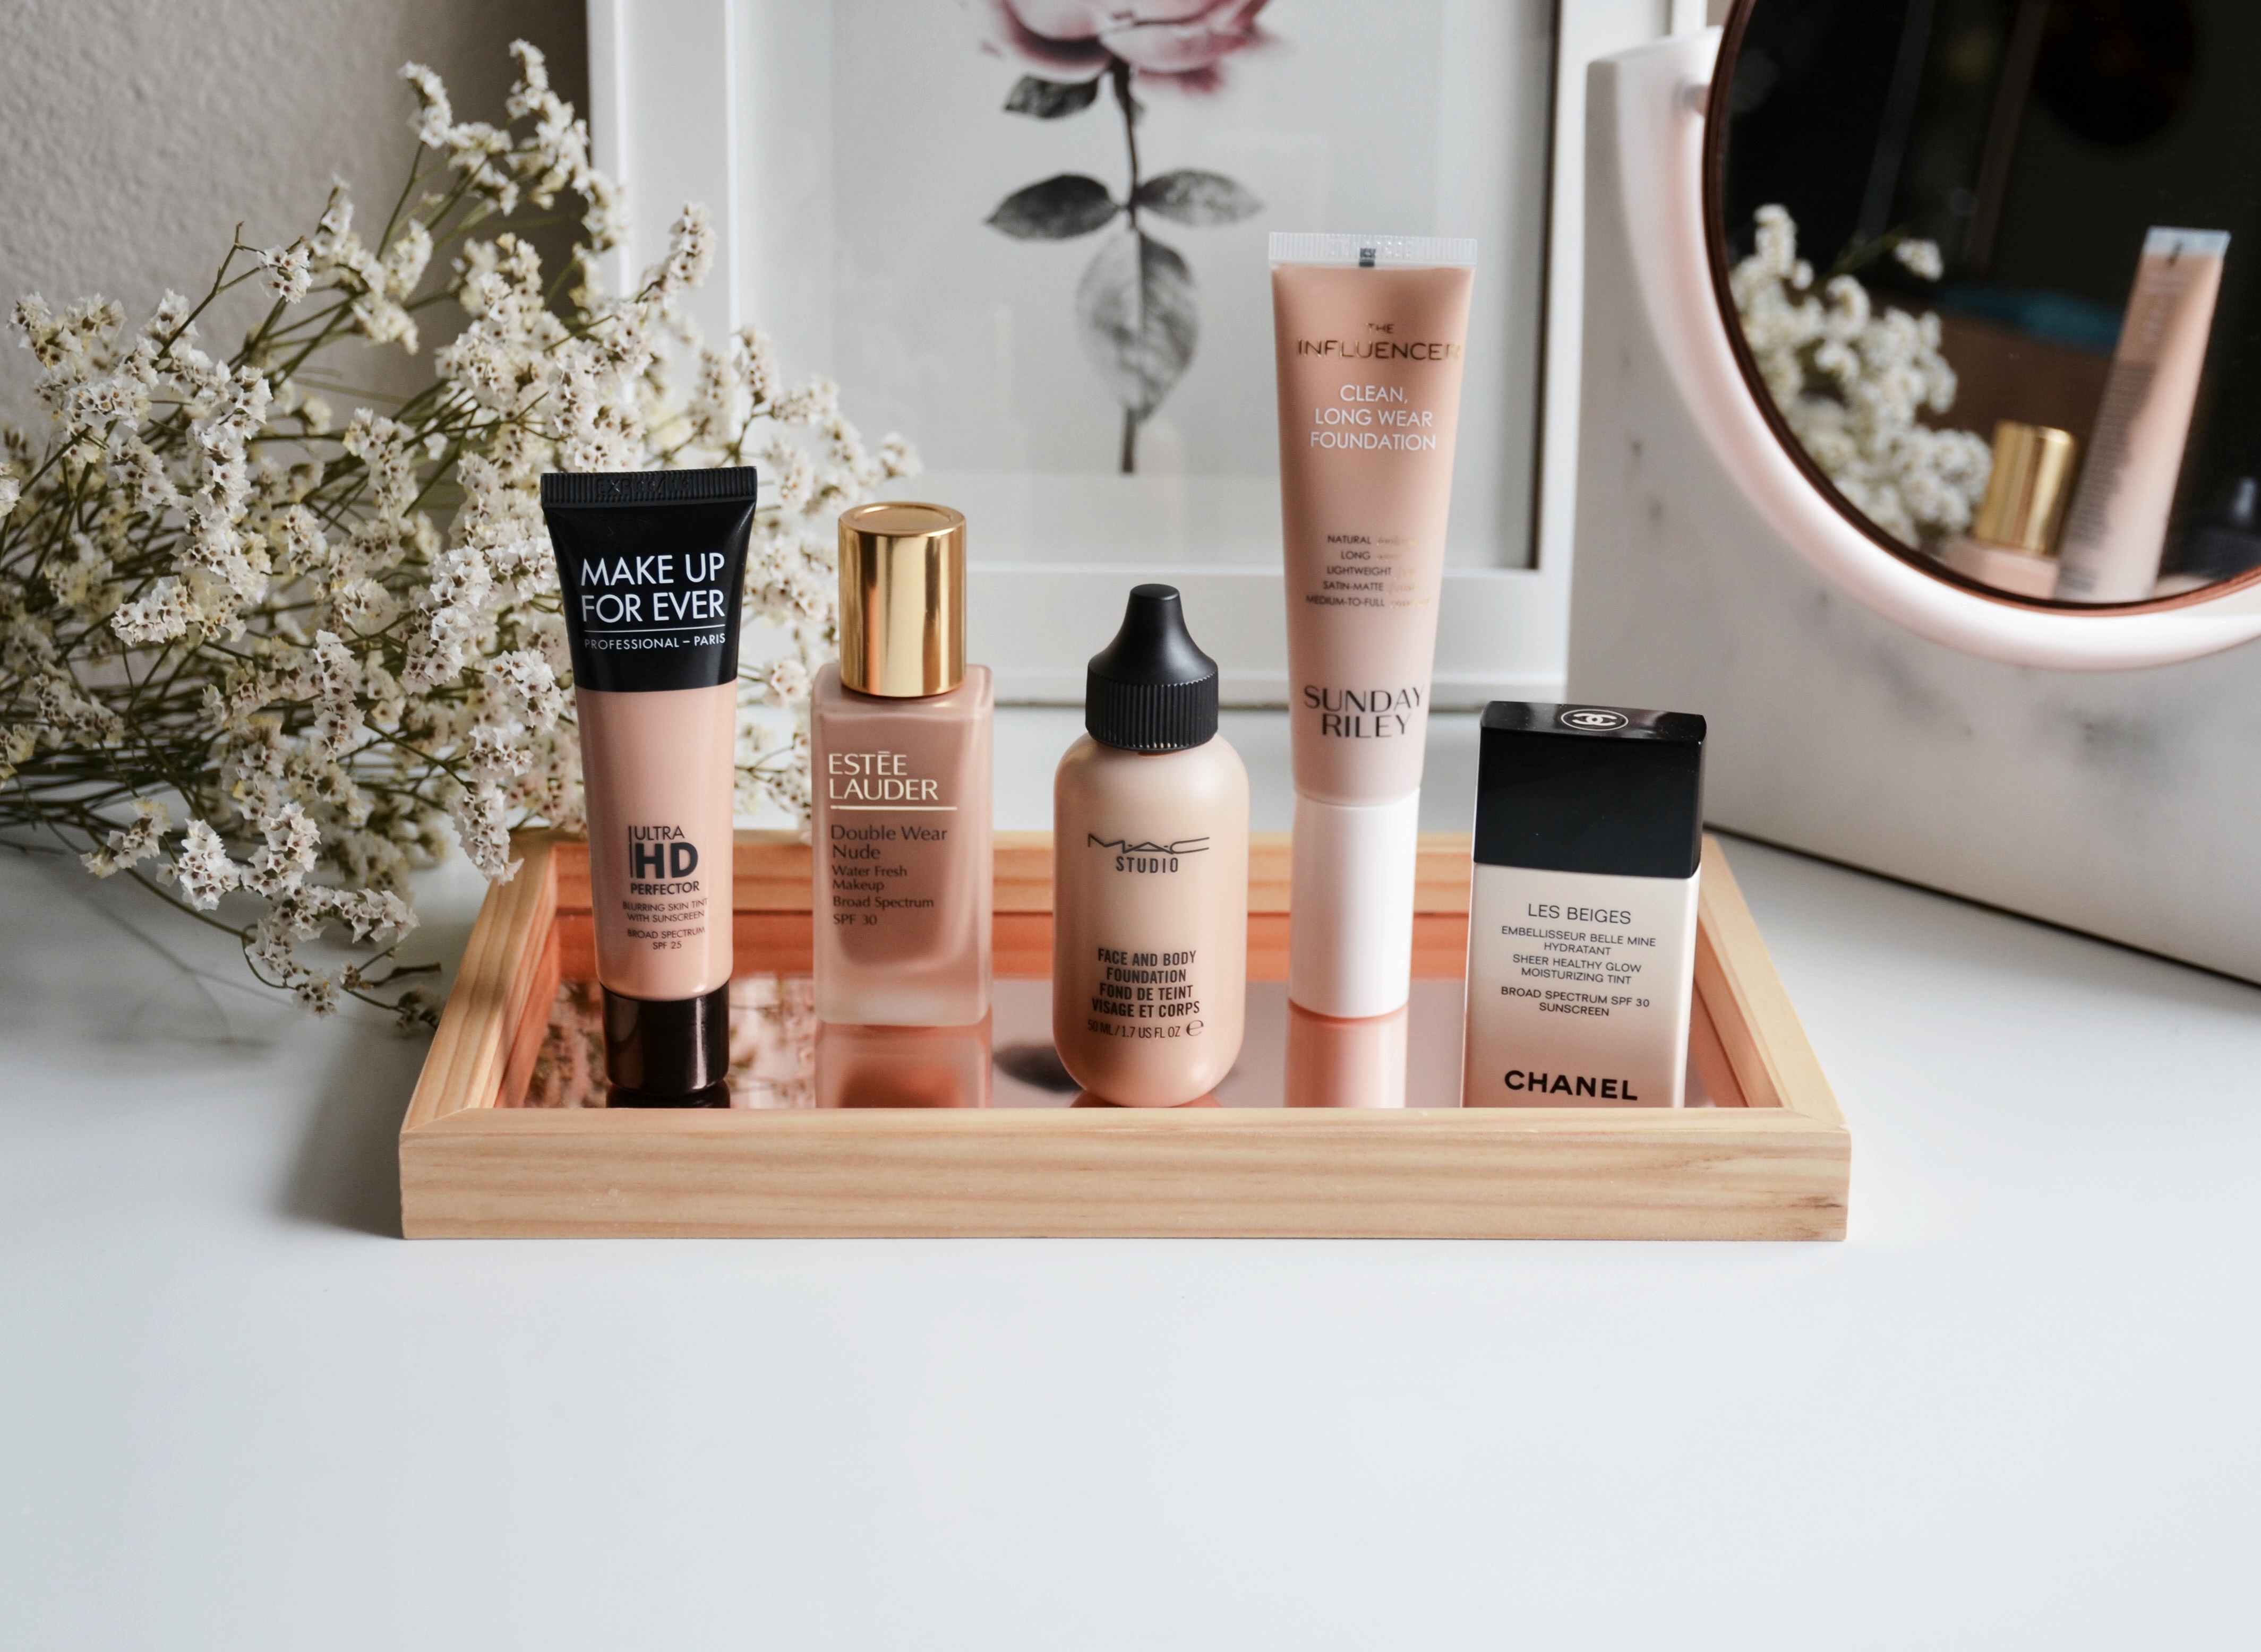 My Skin But Better Foundation - Makeup-Sessions